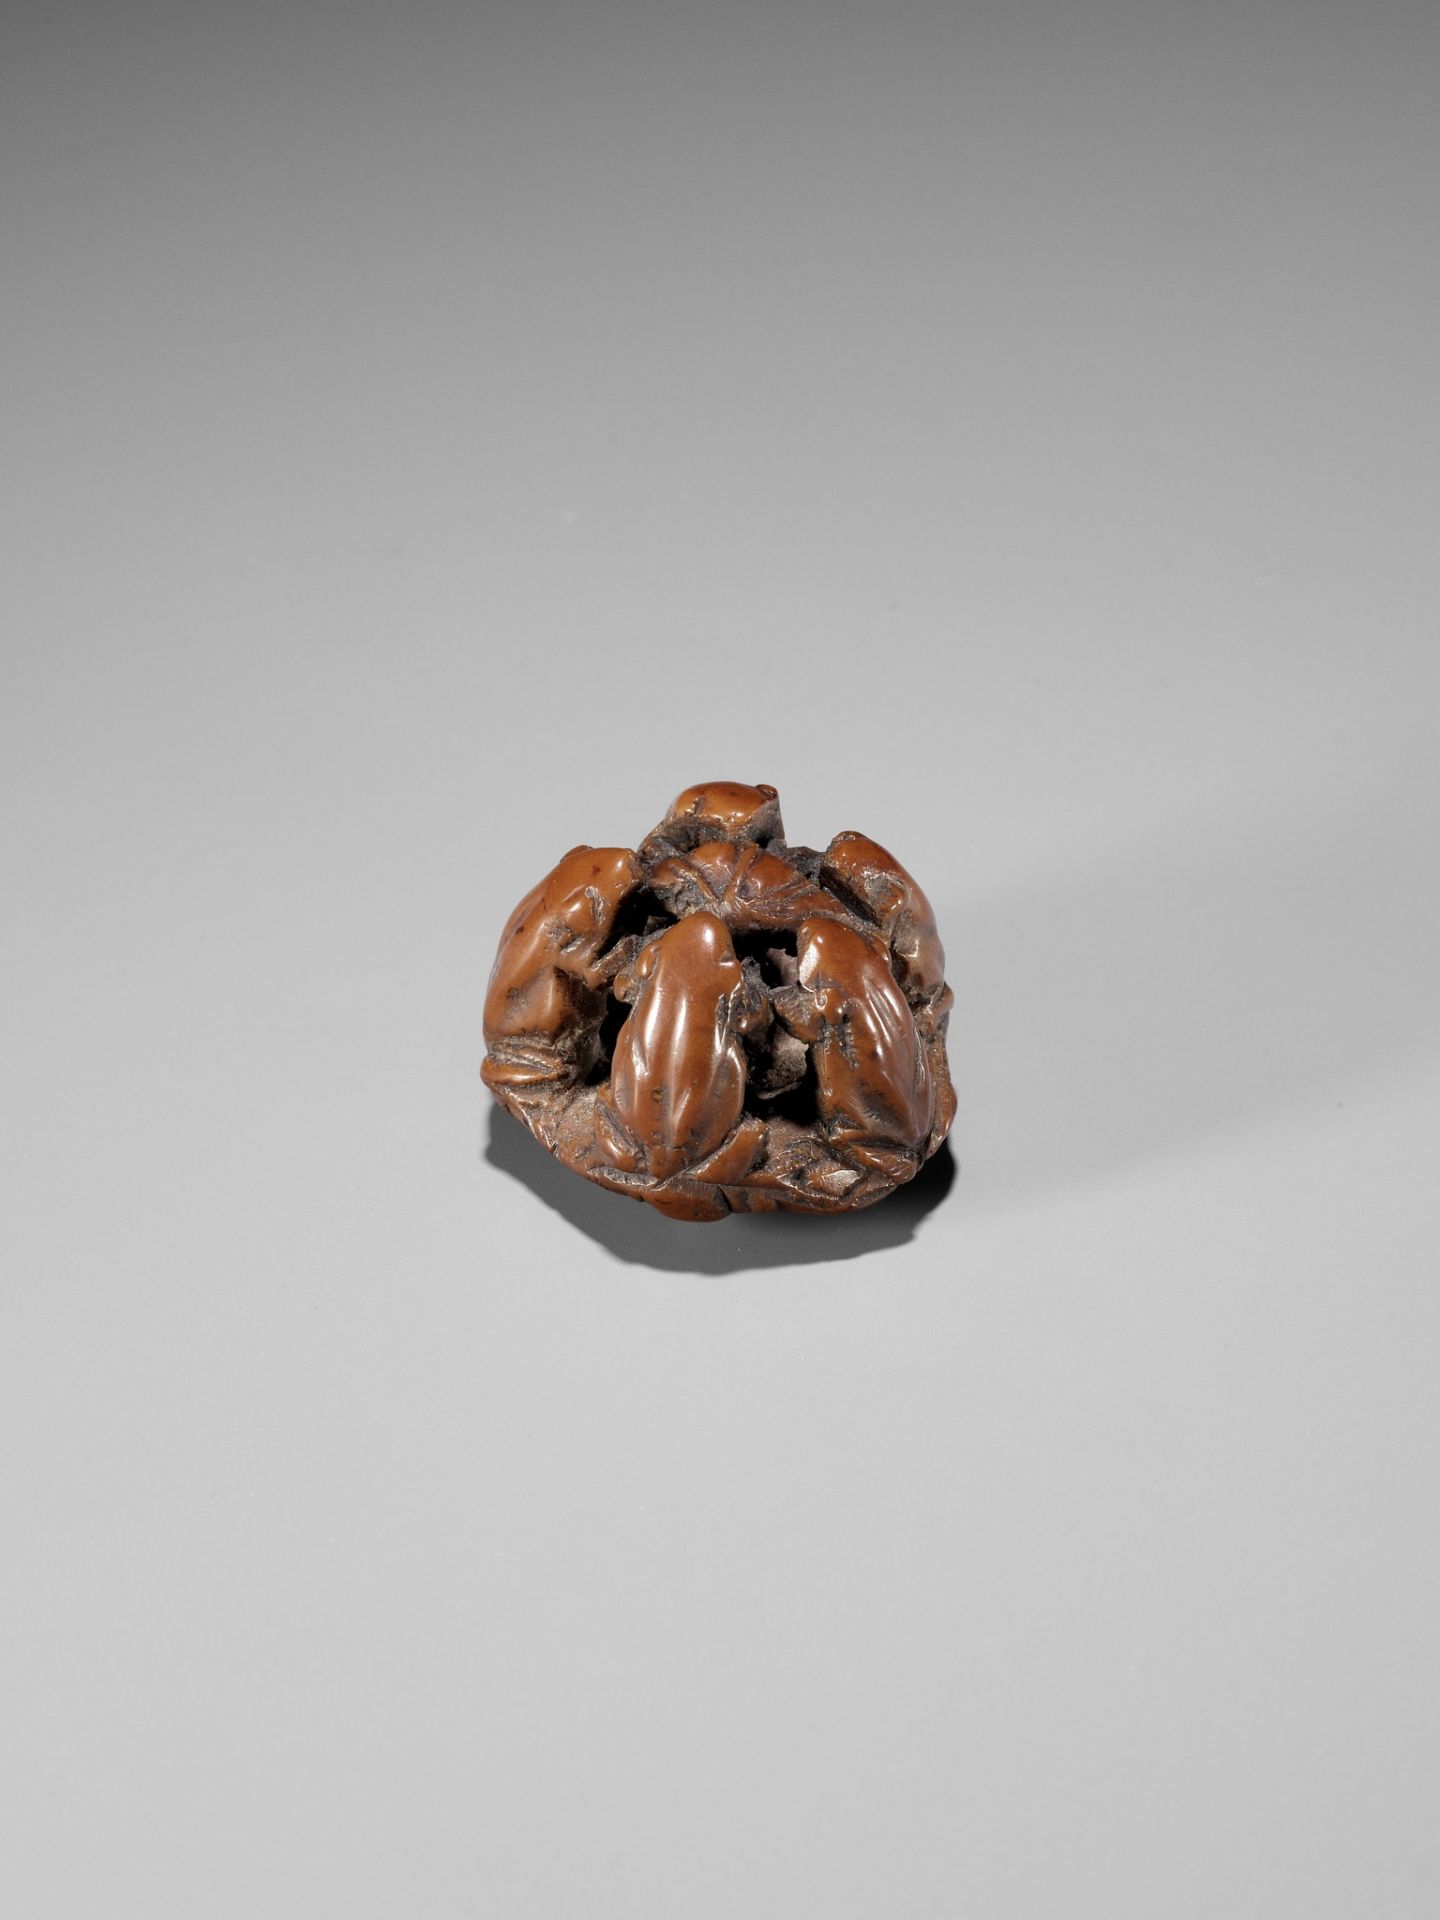 A RARE NUT NETSUKE OF FIVE FROGS ON A LOTUS LEAF, ATTRIBUTED TO SEIMIN - Image 8 of 9